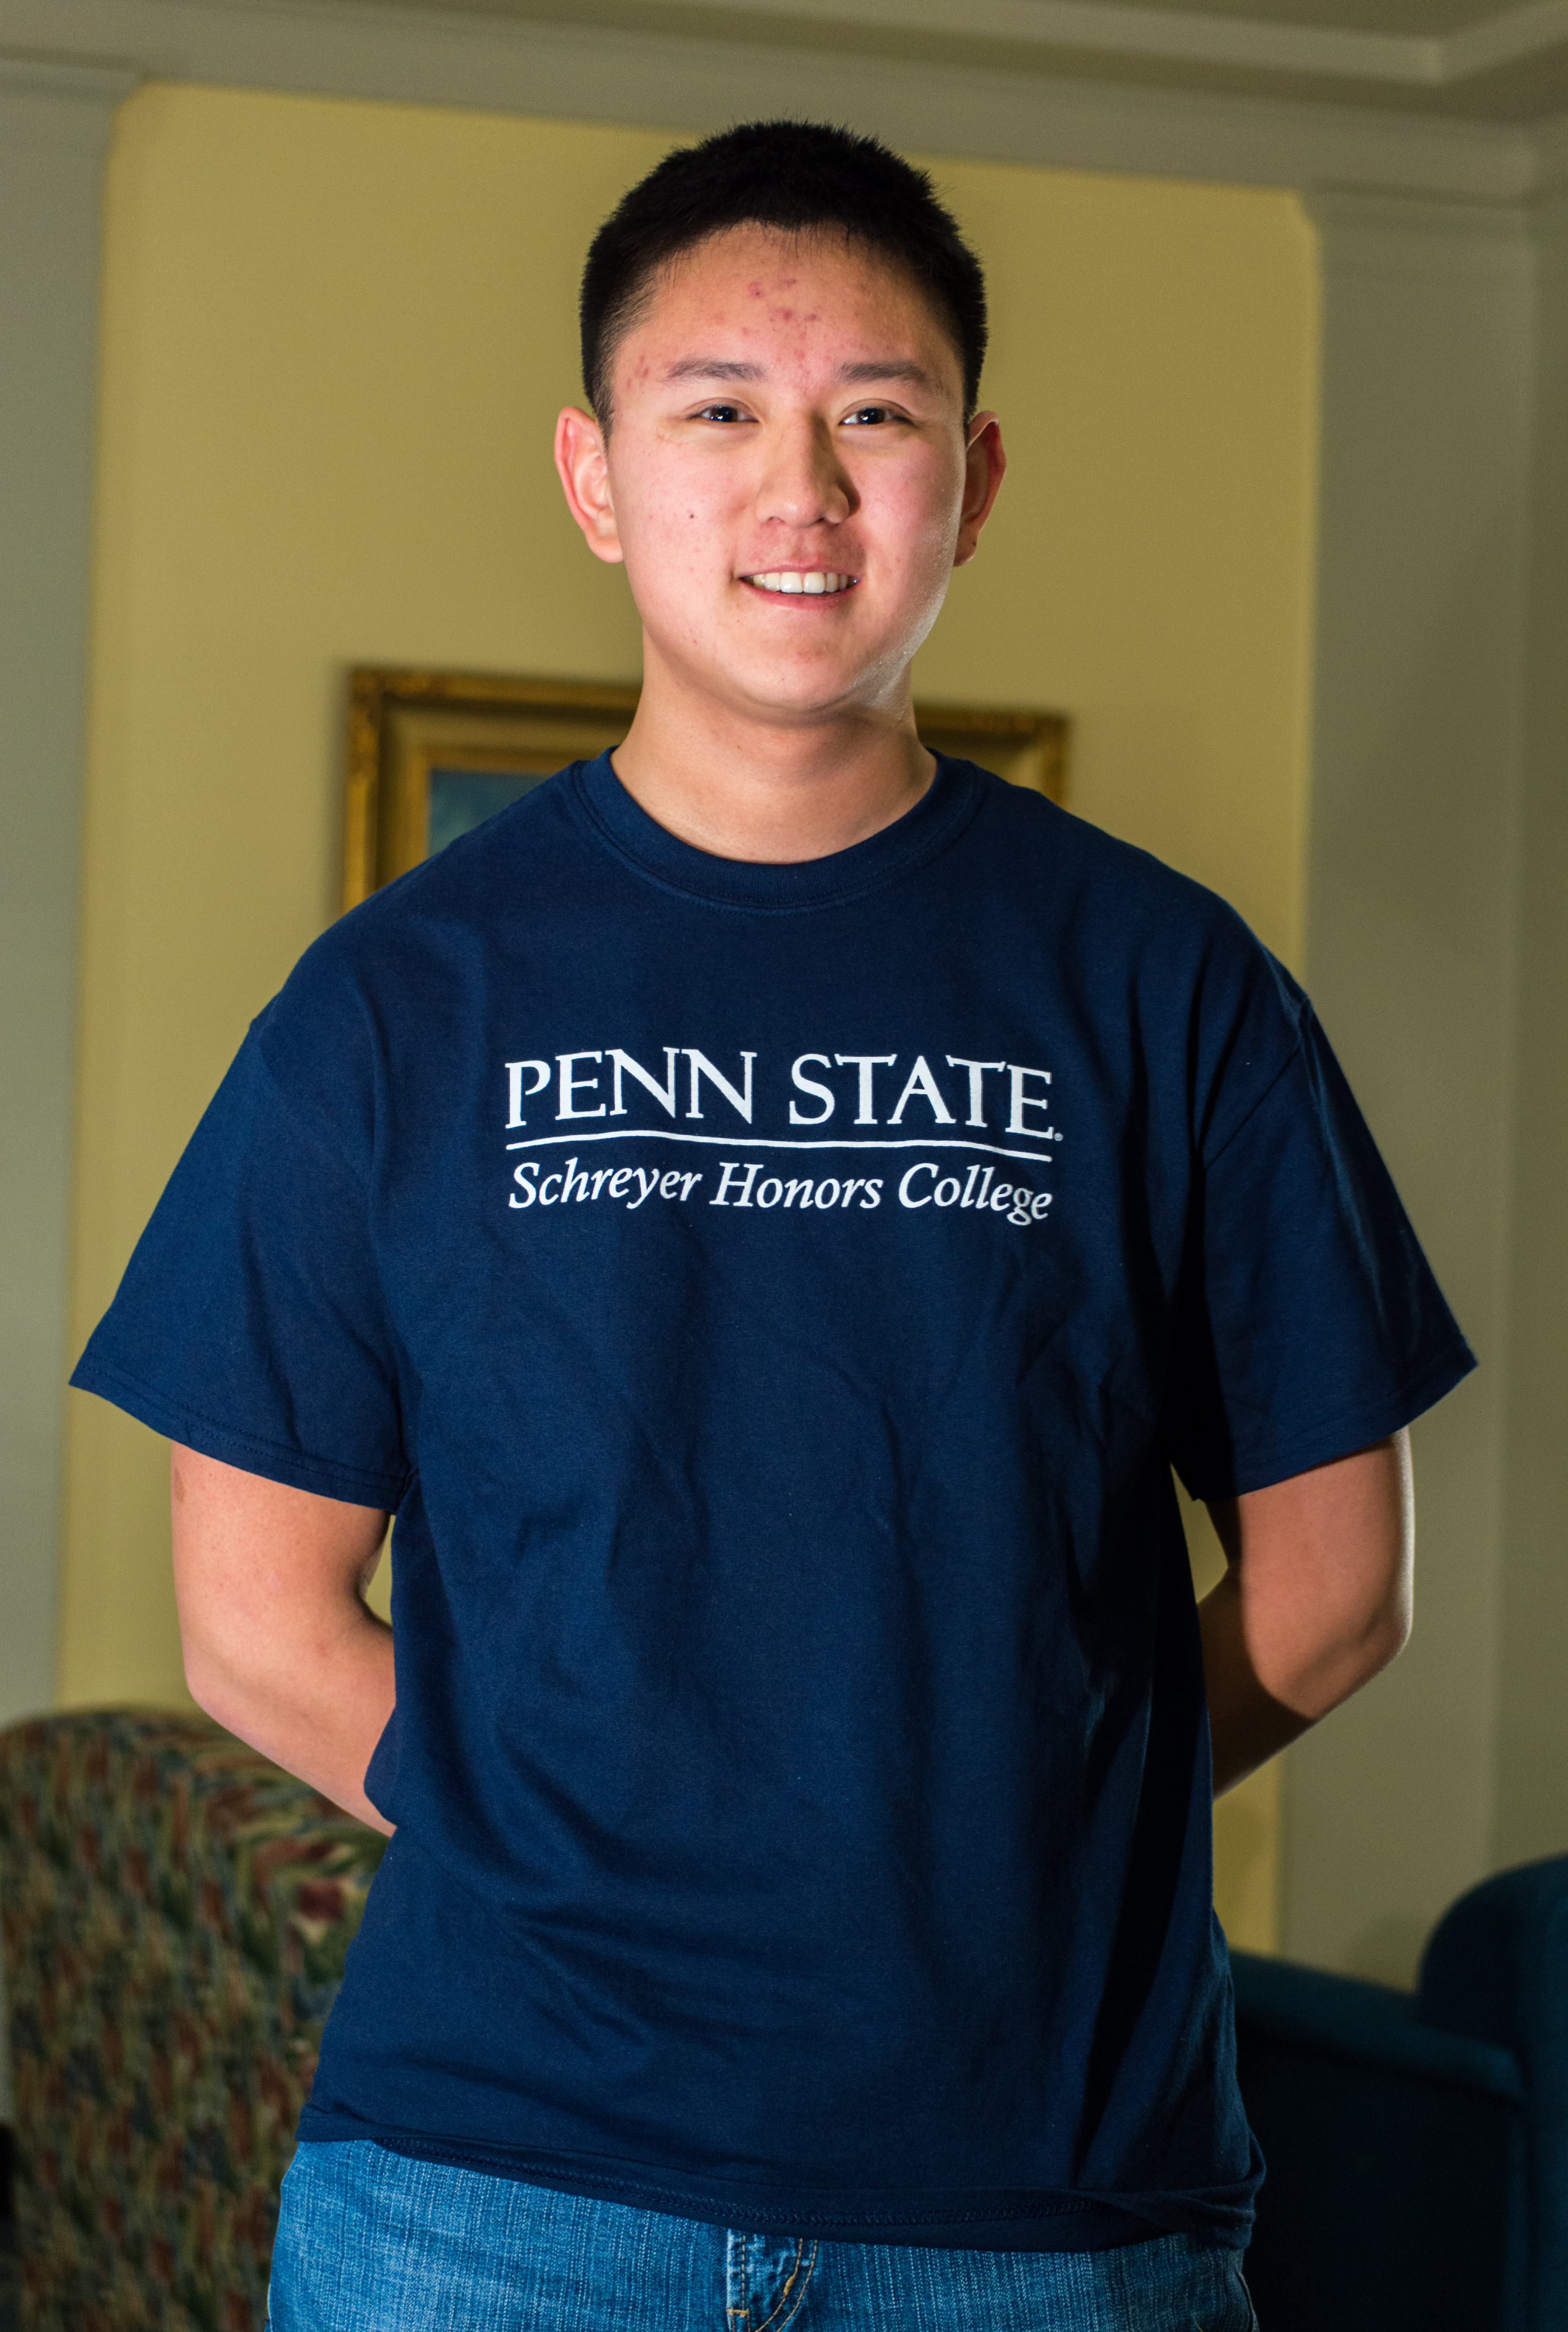 Penn state schreyer honors college